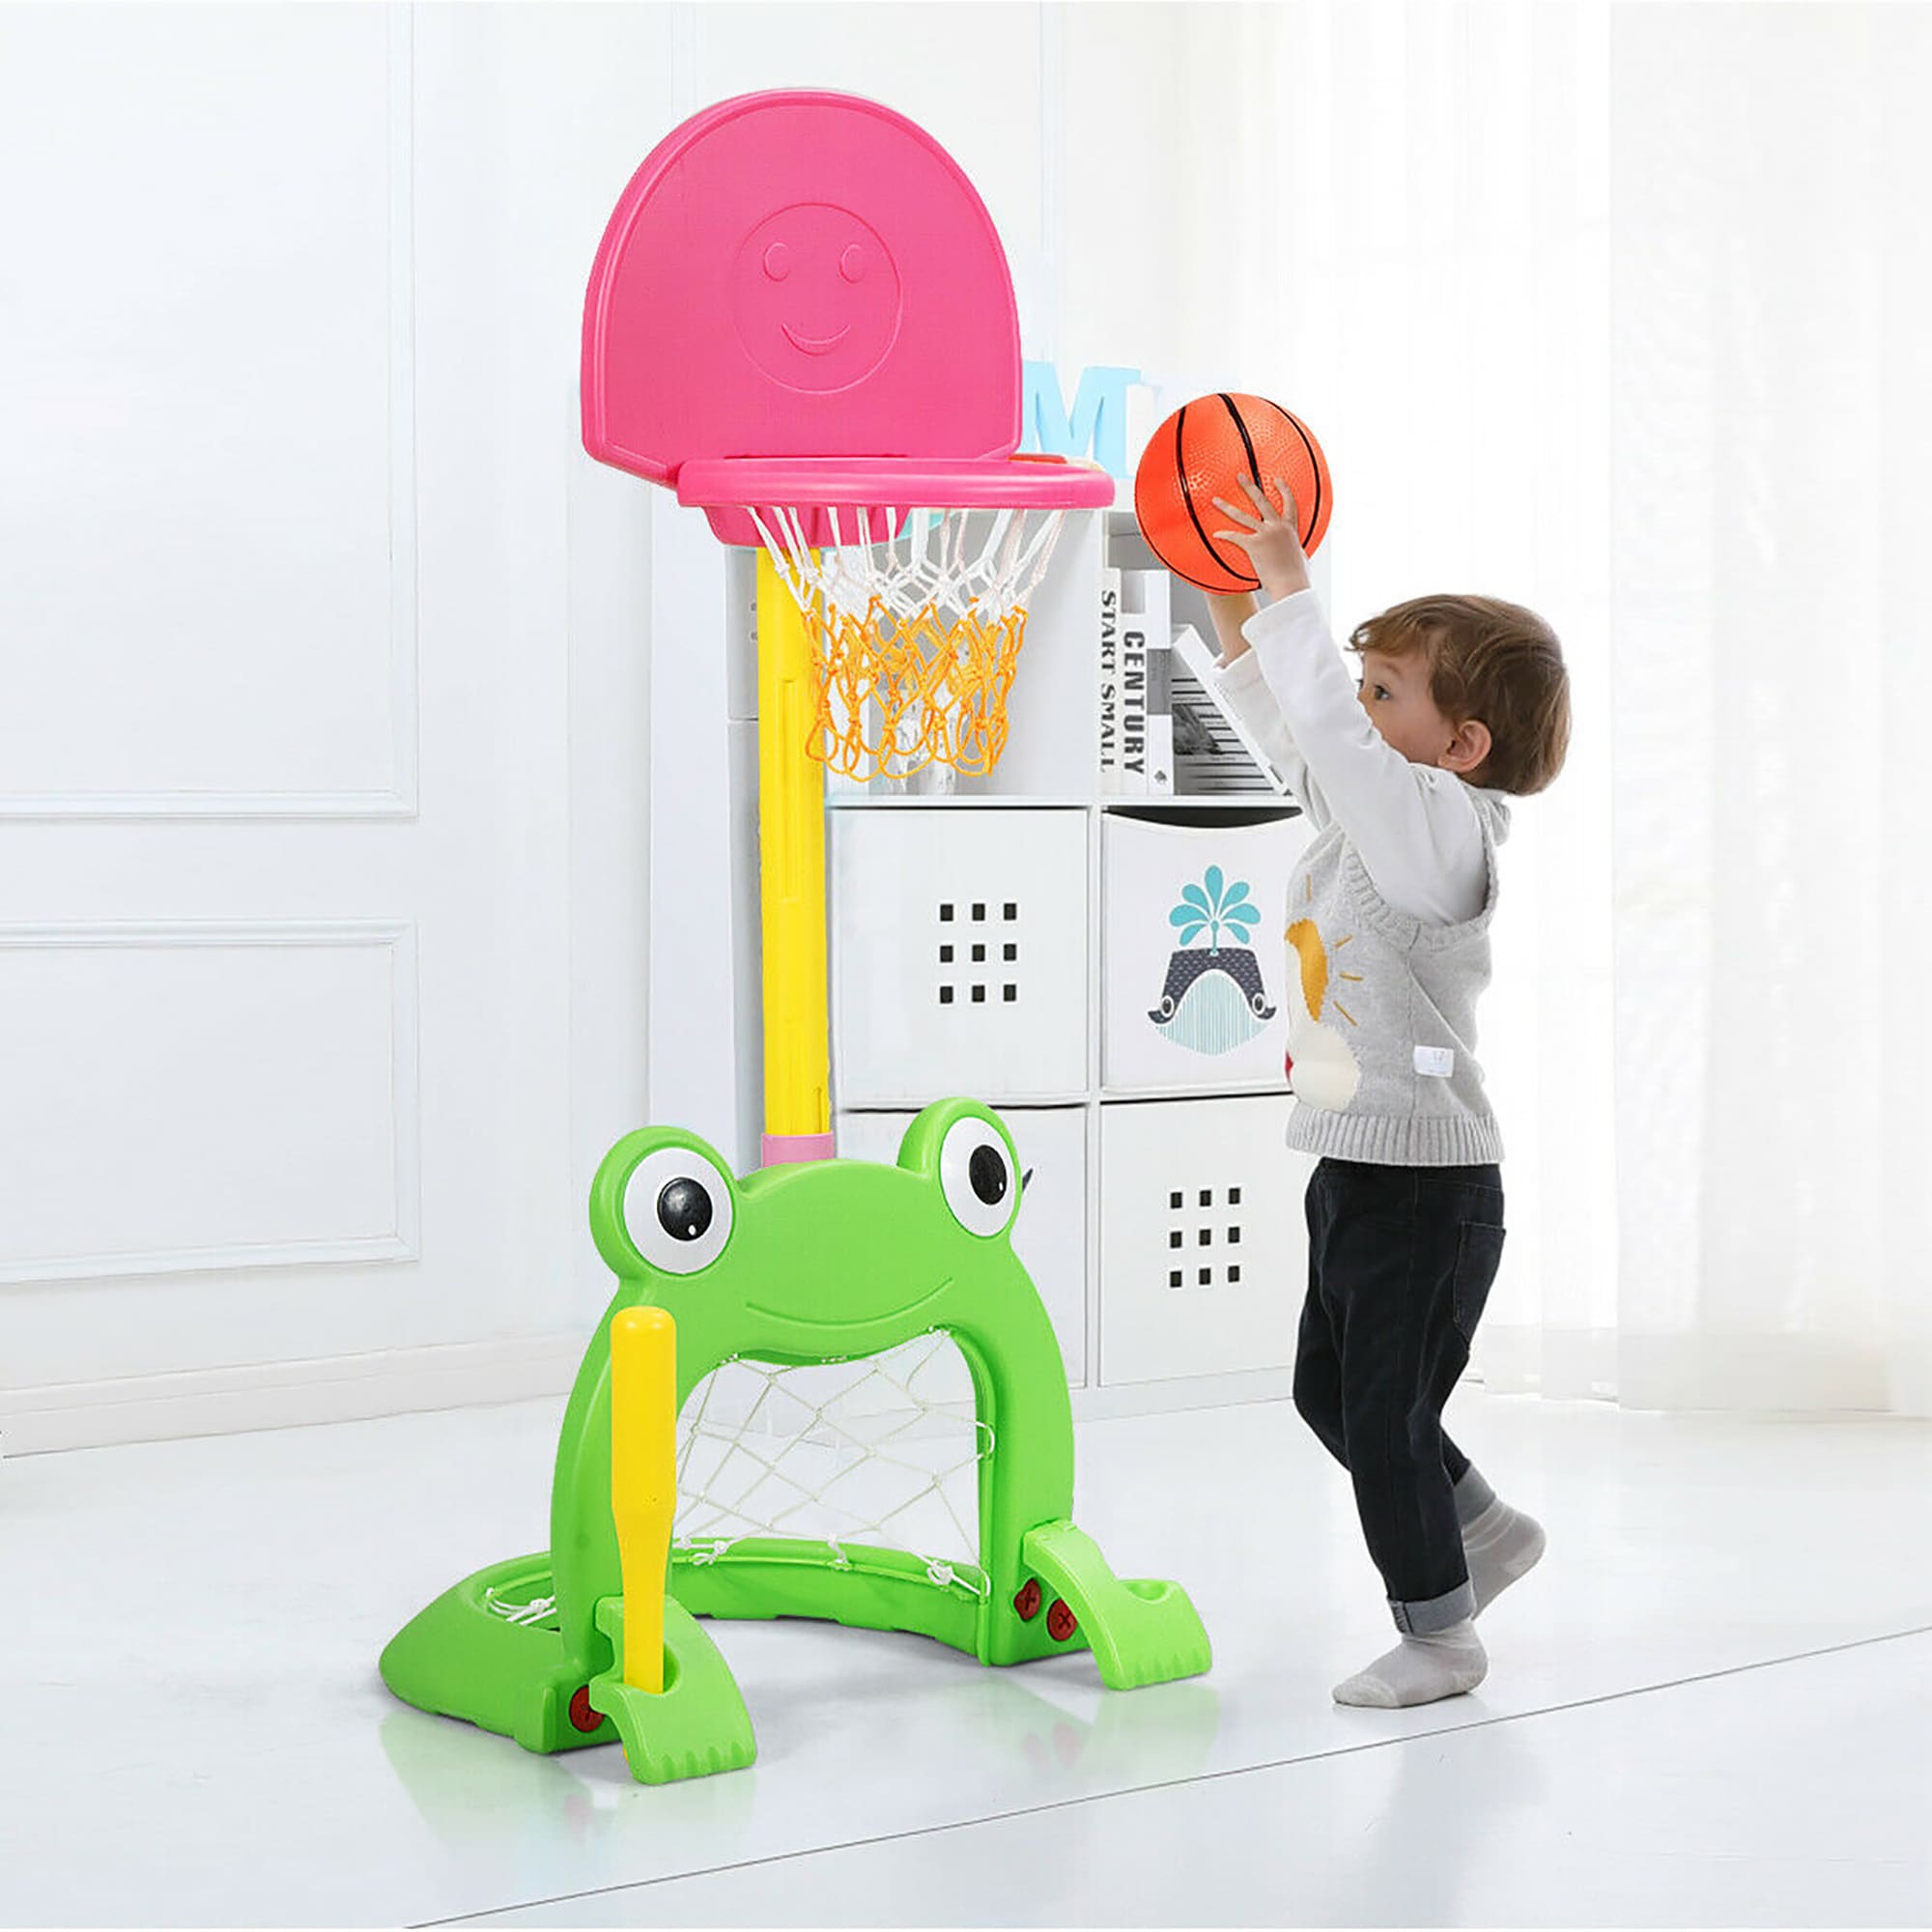 3 in 1 Sports Activity Center Grow-to-Pro Adjustable Easy S Basketball Hoop Set 